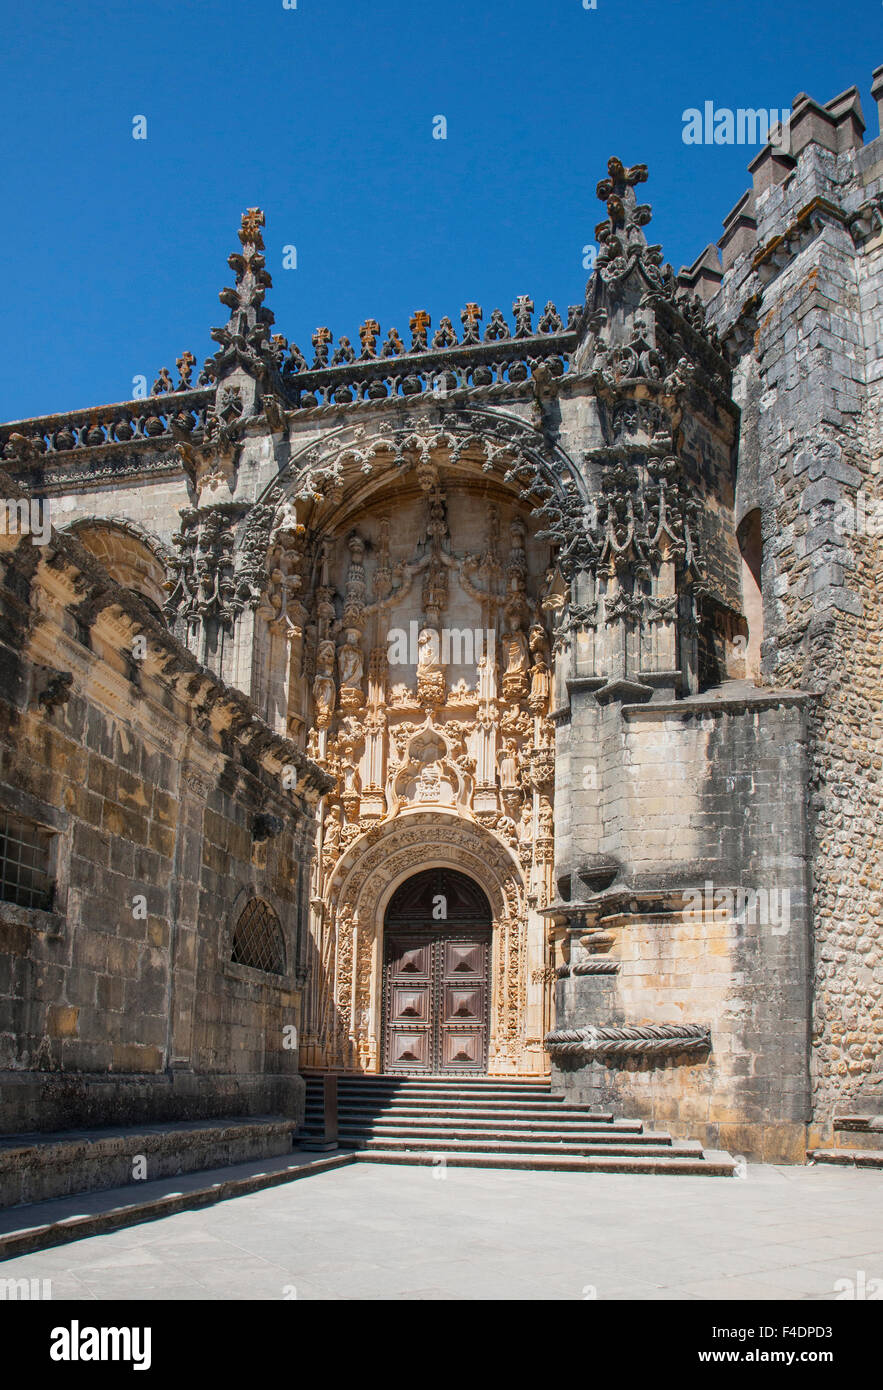 This is the entrance to the ornate monastery of Convento de Cristo located in Tomar, Portugal Stock Photo